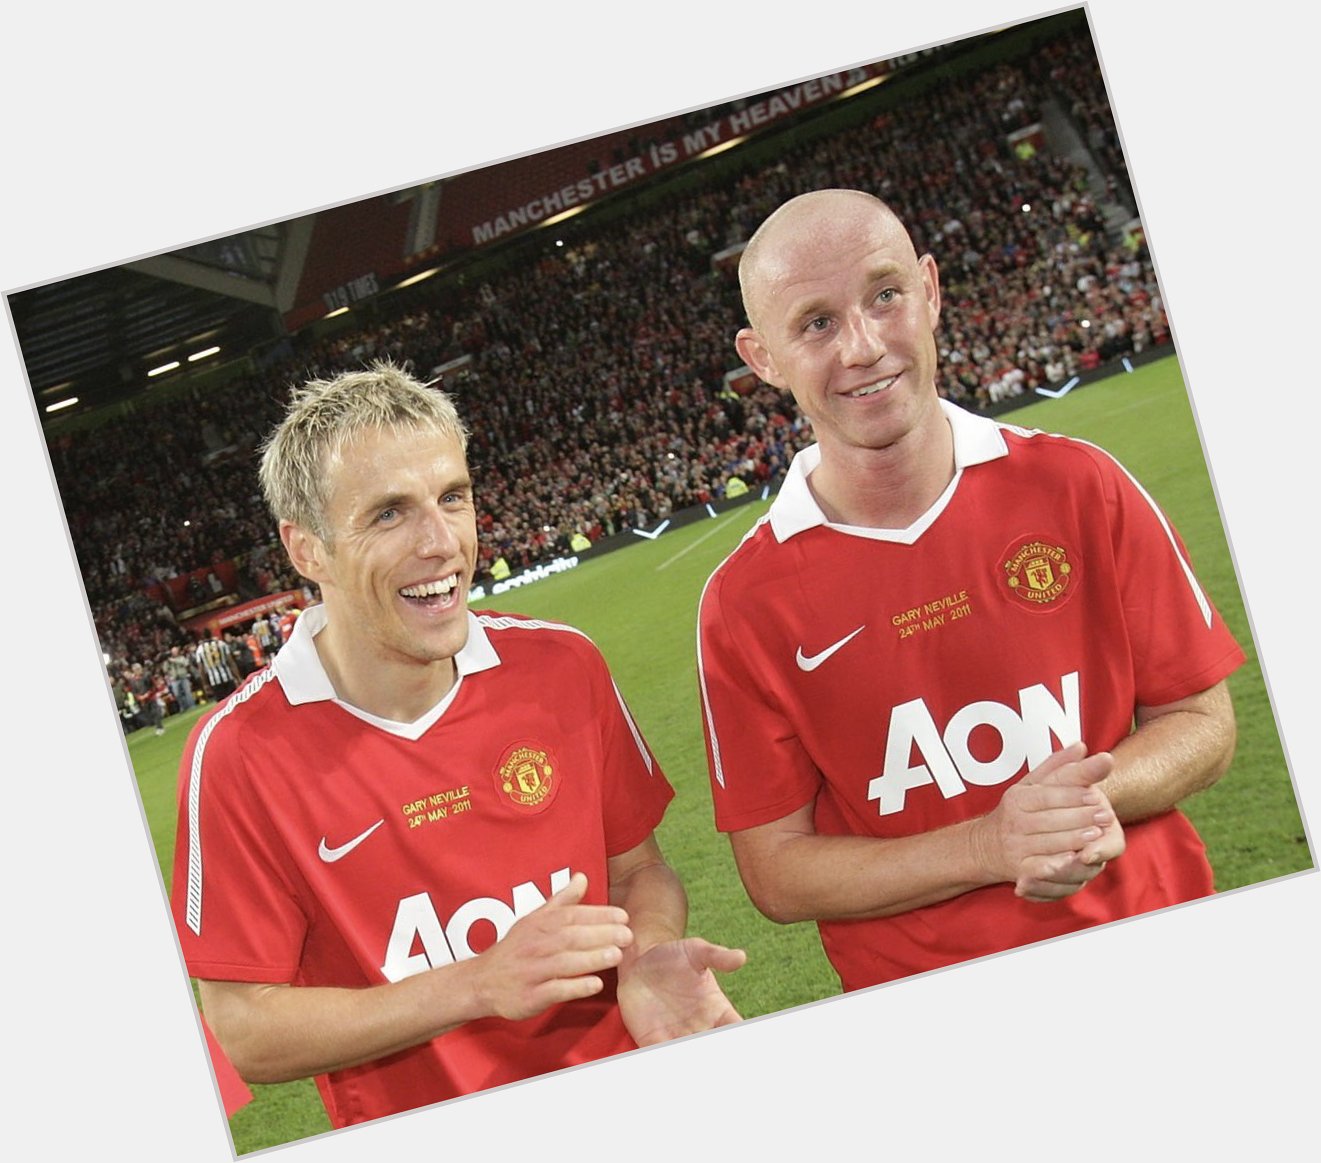 Phil Neville and Nicky Butt were born on this date in 1977 & 1975 respectively. Happy birthday lads    